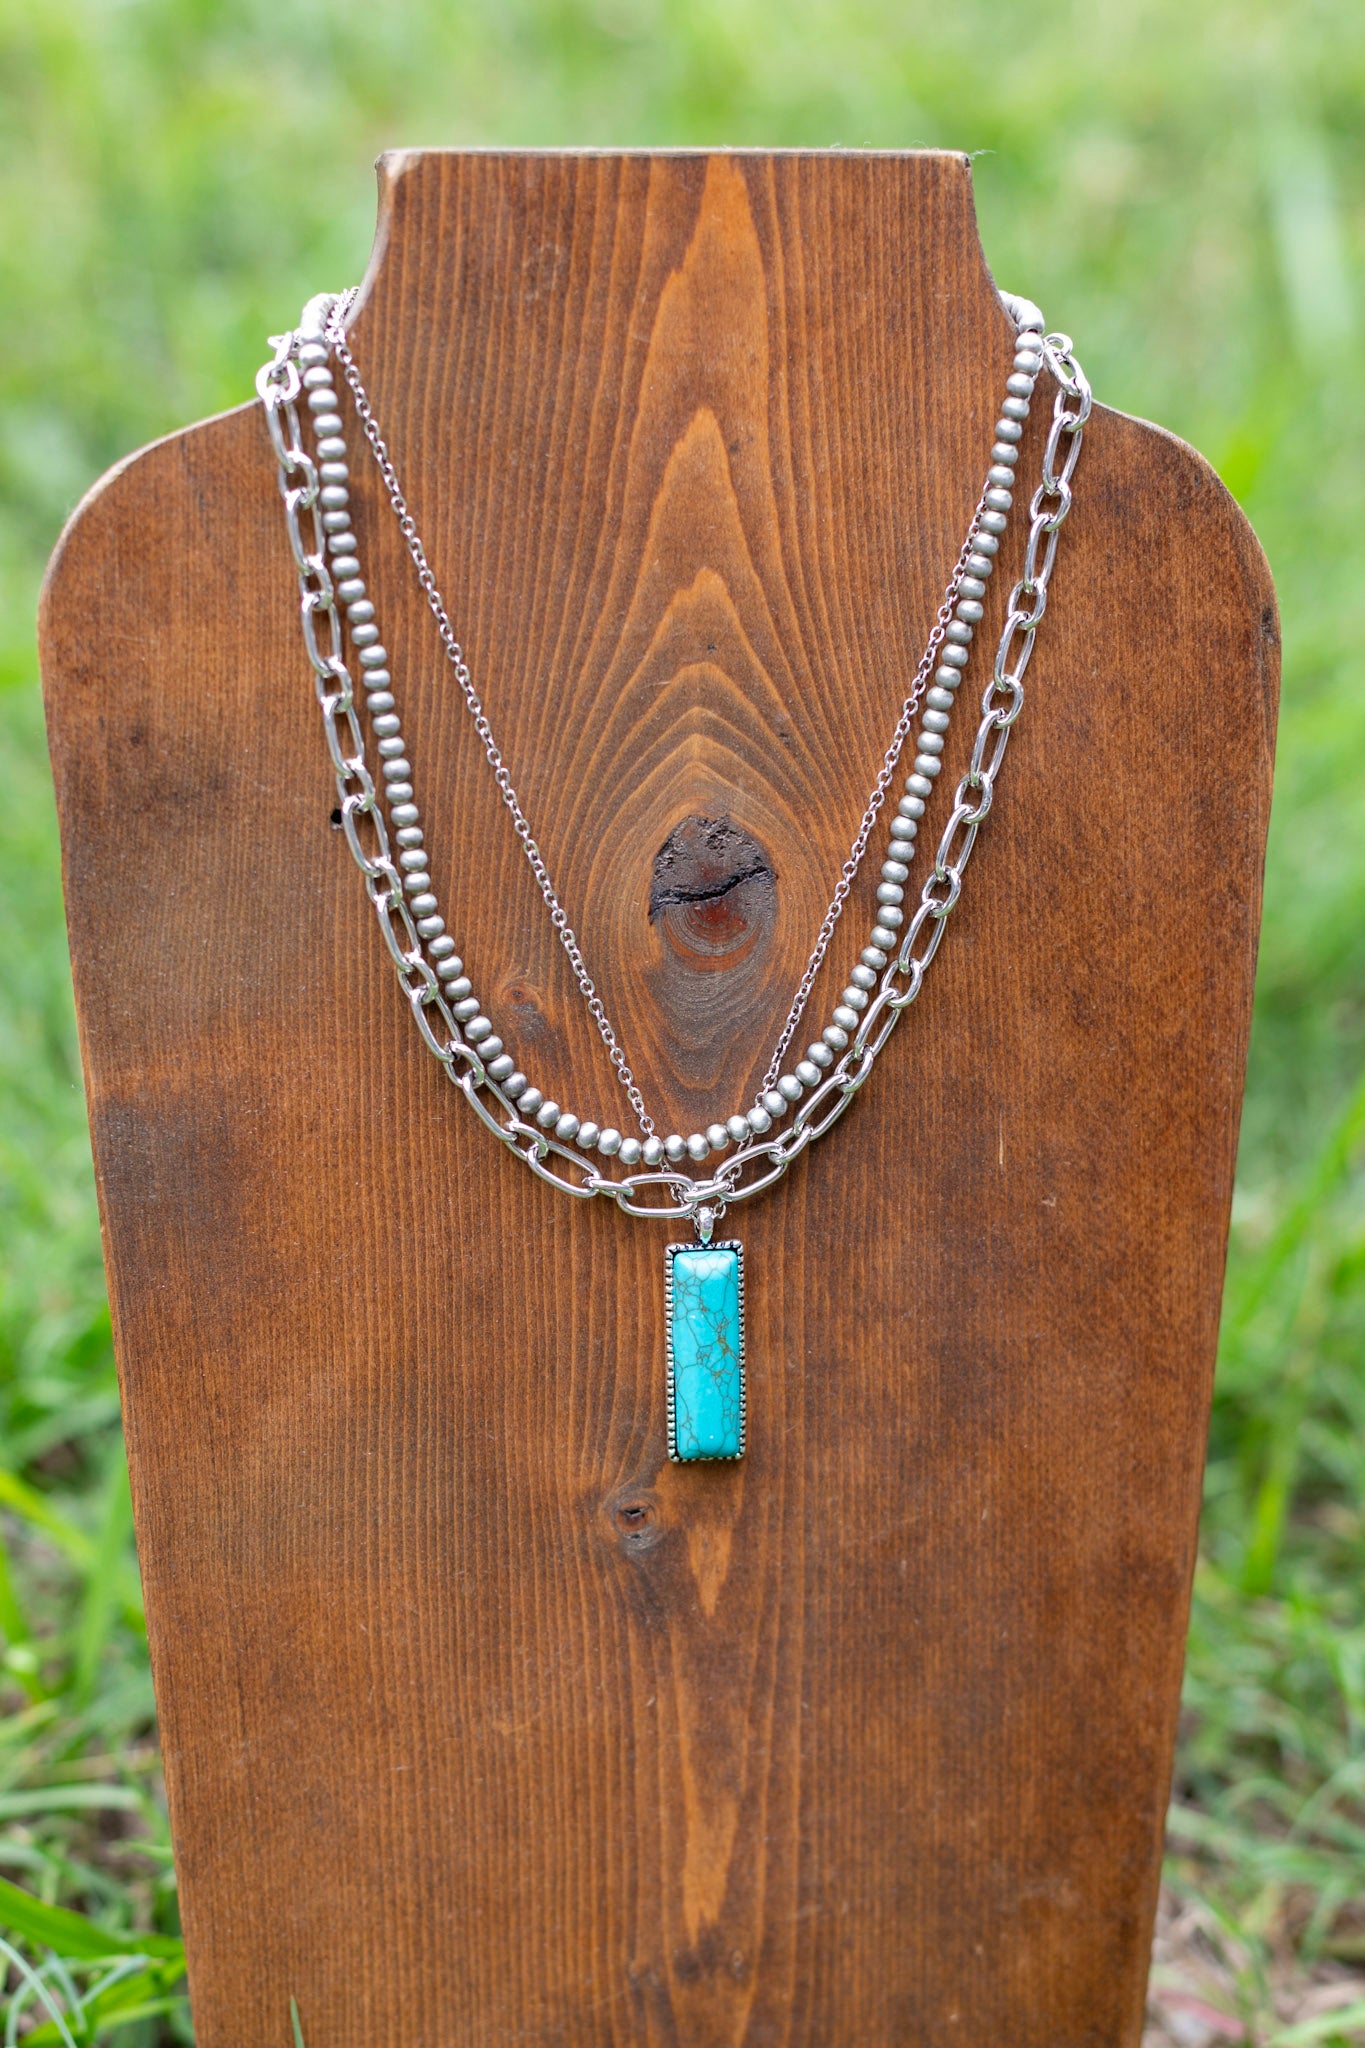 The Hico Necklace